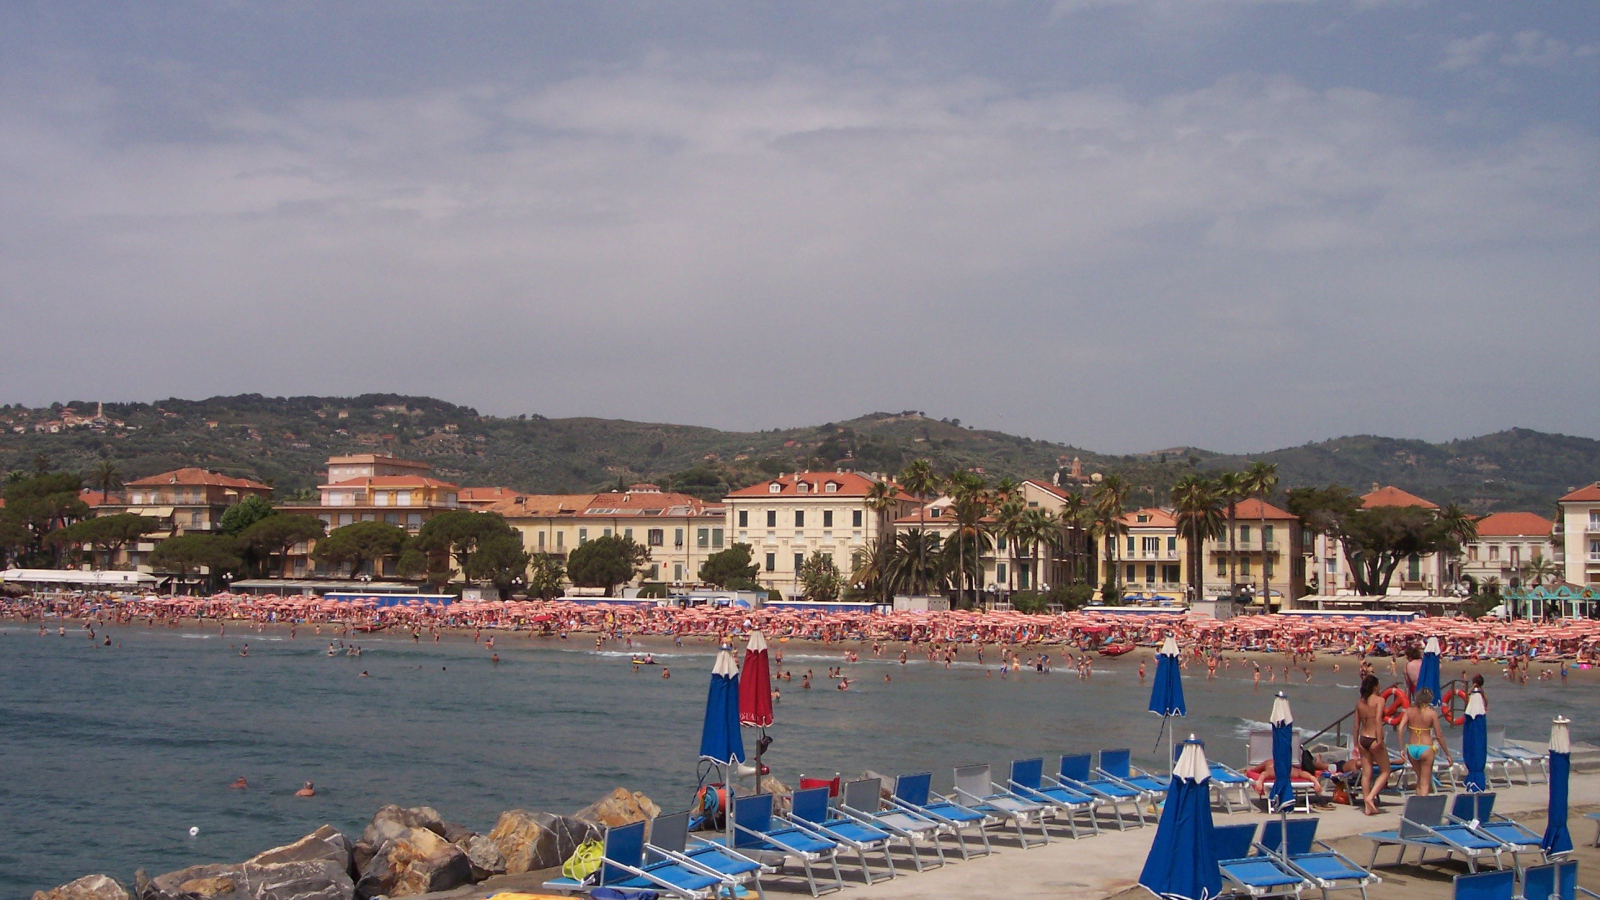 Summer vacation at the beach in the resort of Diano Marina, Italy